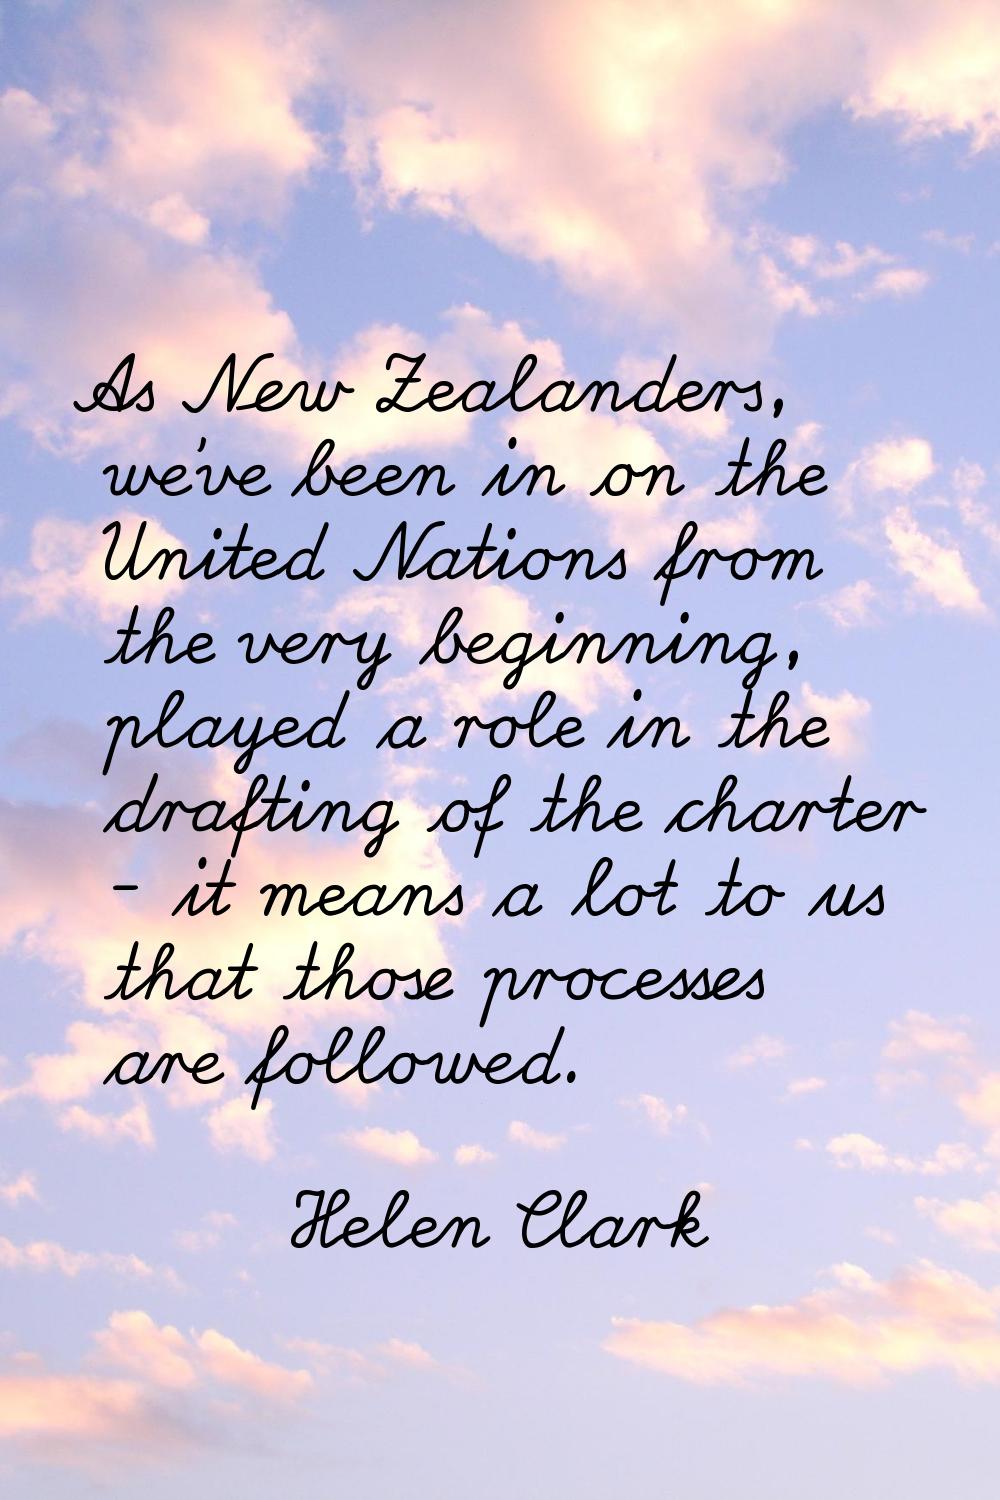 As New Zealanders, we've been in on the United Nations from the very beginning, played a role in th